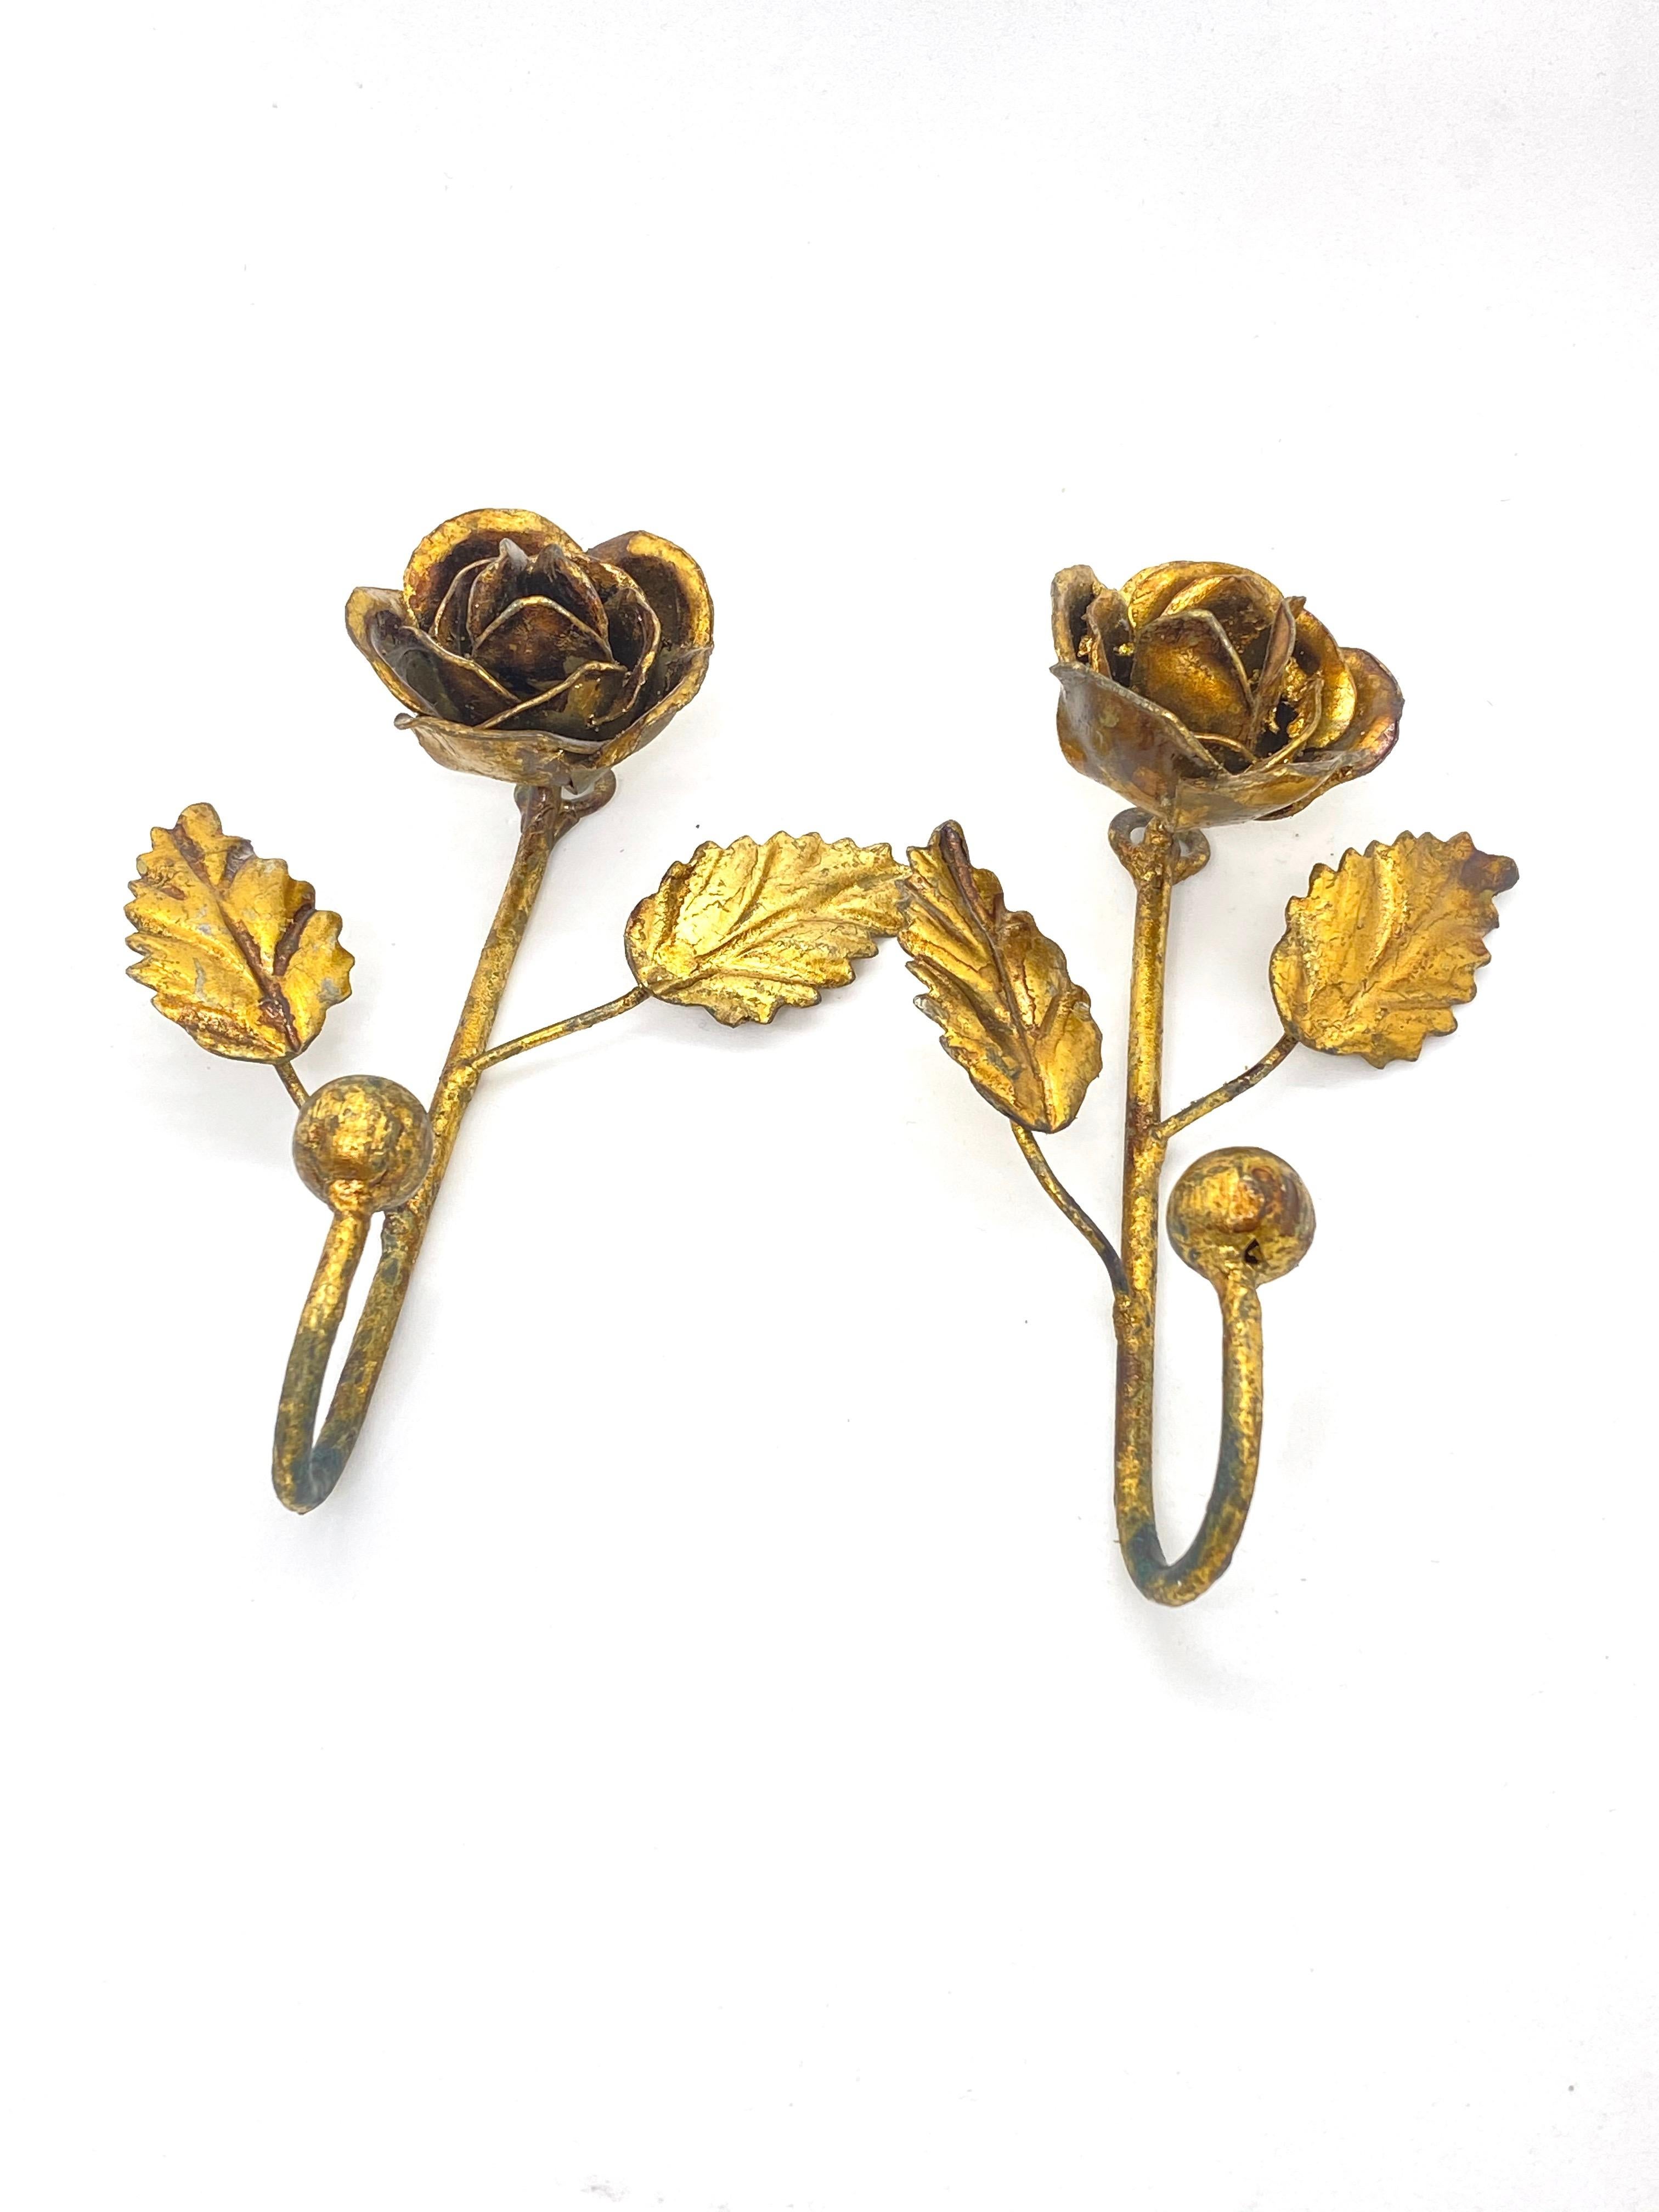 Offered is an absolutely stunning, 1950s Italian gilt metal coat hook set for your hall entry. Minor patina and paint lost gives these pieces a classy statement.